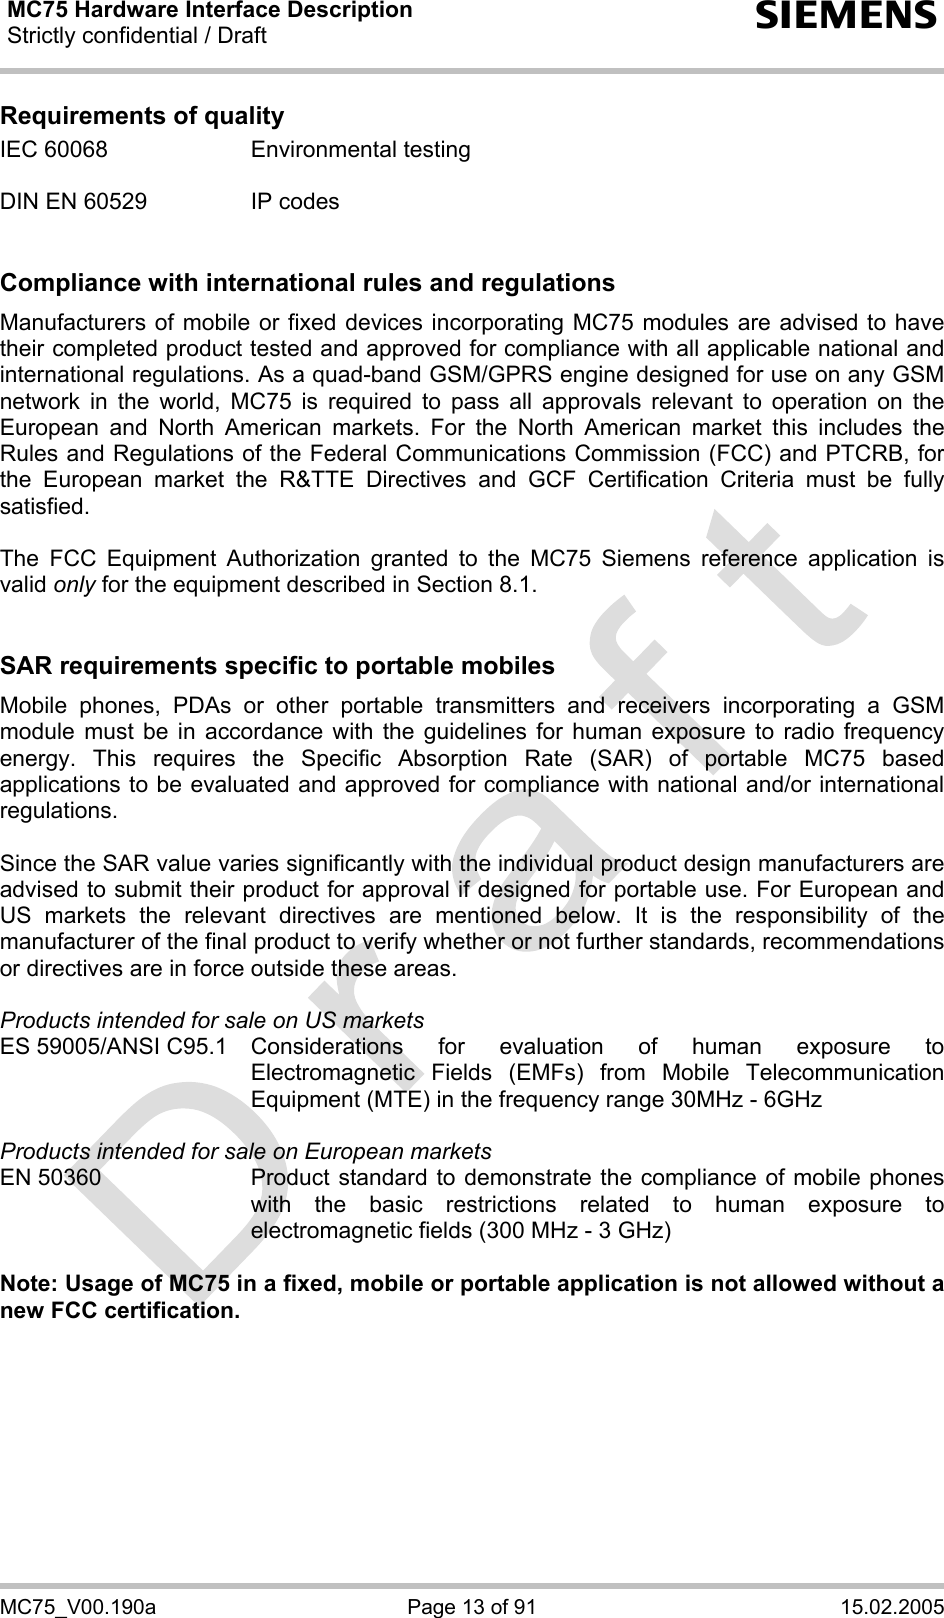 MC75 Hardware Interface Description Strictly confidential / Draft  s MC75_V00.190a  Page 13 of 91  15.02.2005 Requirements of quality IEC 60068  Environmental testing  DIN EN 60529  IP codes   Compliance with international rules and regulations Manufacturers of mobile or fixed devices incorporating MC75 modules are advised to have their completed product tested and approved for compliance with all applicable national and international regulations. As a quad-band GSM/GPRS engine designed for use on any GSM network in the world, MC75 is required to pass all approvals relevant to operation on the European and North American markets. For the North American market this includes the Rules and Regulations of the Federal Communications Commission (FCC) and PTCRB, for the European market the R&amp;TTE Directives and GCF Certification Criteria must be fully satisfied.  The FCC Equipment Authorization granted to the MC75 Siemens reference application is valid only for the equipment described in Section 8.1.   SAR requirements specific to portable mobiles Mobile phones, PDAs or other portable transmitters and receivers incorporating a GSM module must be in accordance with the guidelines for human exposure to radio frequency energy. This requires the Specific Absorption Rate (SAR) of portable MC75 based applications to be evaluated and approved for compliance with national and/or international regulations.   Since the SAR value varies significantly with the individual product design manufacturers are advised to submit their product for approval if designed for portable use. For European and US markets the relevant directives are mentioned below. It is the responsibility of the manufacturer of the final product to verify whether or not further standards, recommendations or directives are in force outside these areas.   Products intended for sale on US markets ES 59005/ANSI C95.1 Considerations for evaluation of human exposure to Electromagnetic Fields (EMFs) from Mobile Telecommunication Equipment (MTE) in the frequency range 30MHz - 6GHz   Products intended for sale on European markets EN 50360  Product standard to demonstrate the compliance of mobile phones with the basic restrictions related to human exposure to electromagnetic fields (300 MHz - 3 GHz)  Note: Usage of MC75 in a fixed, mobile or portable application is not allowed without a new FCC certification.  